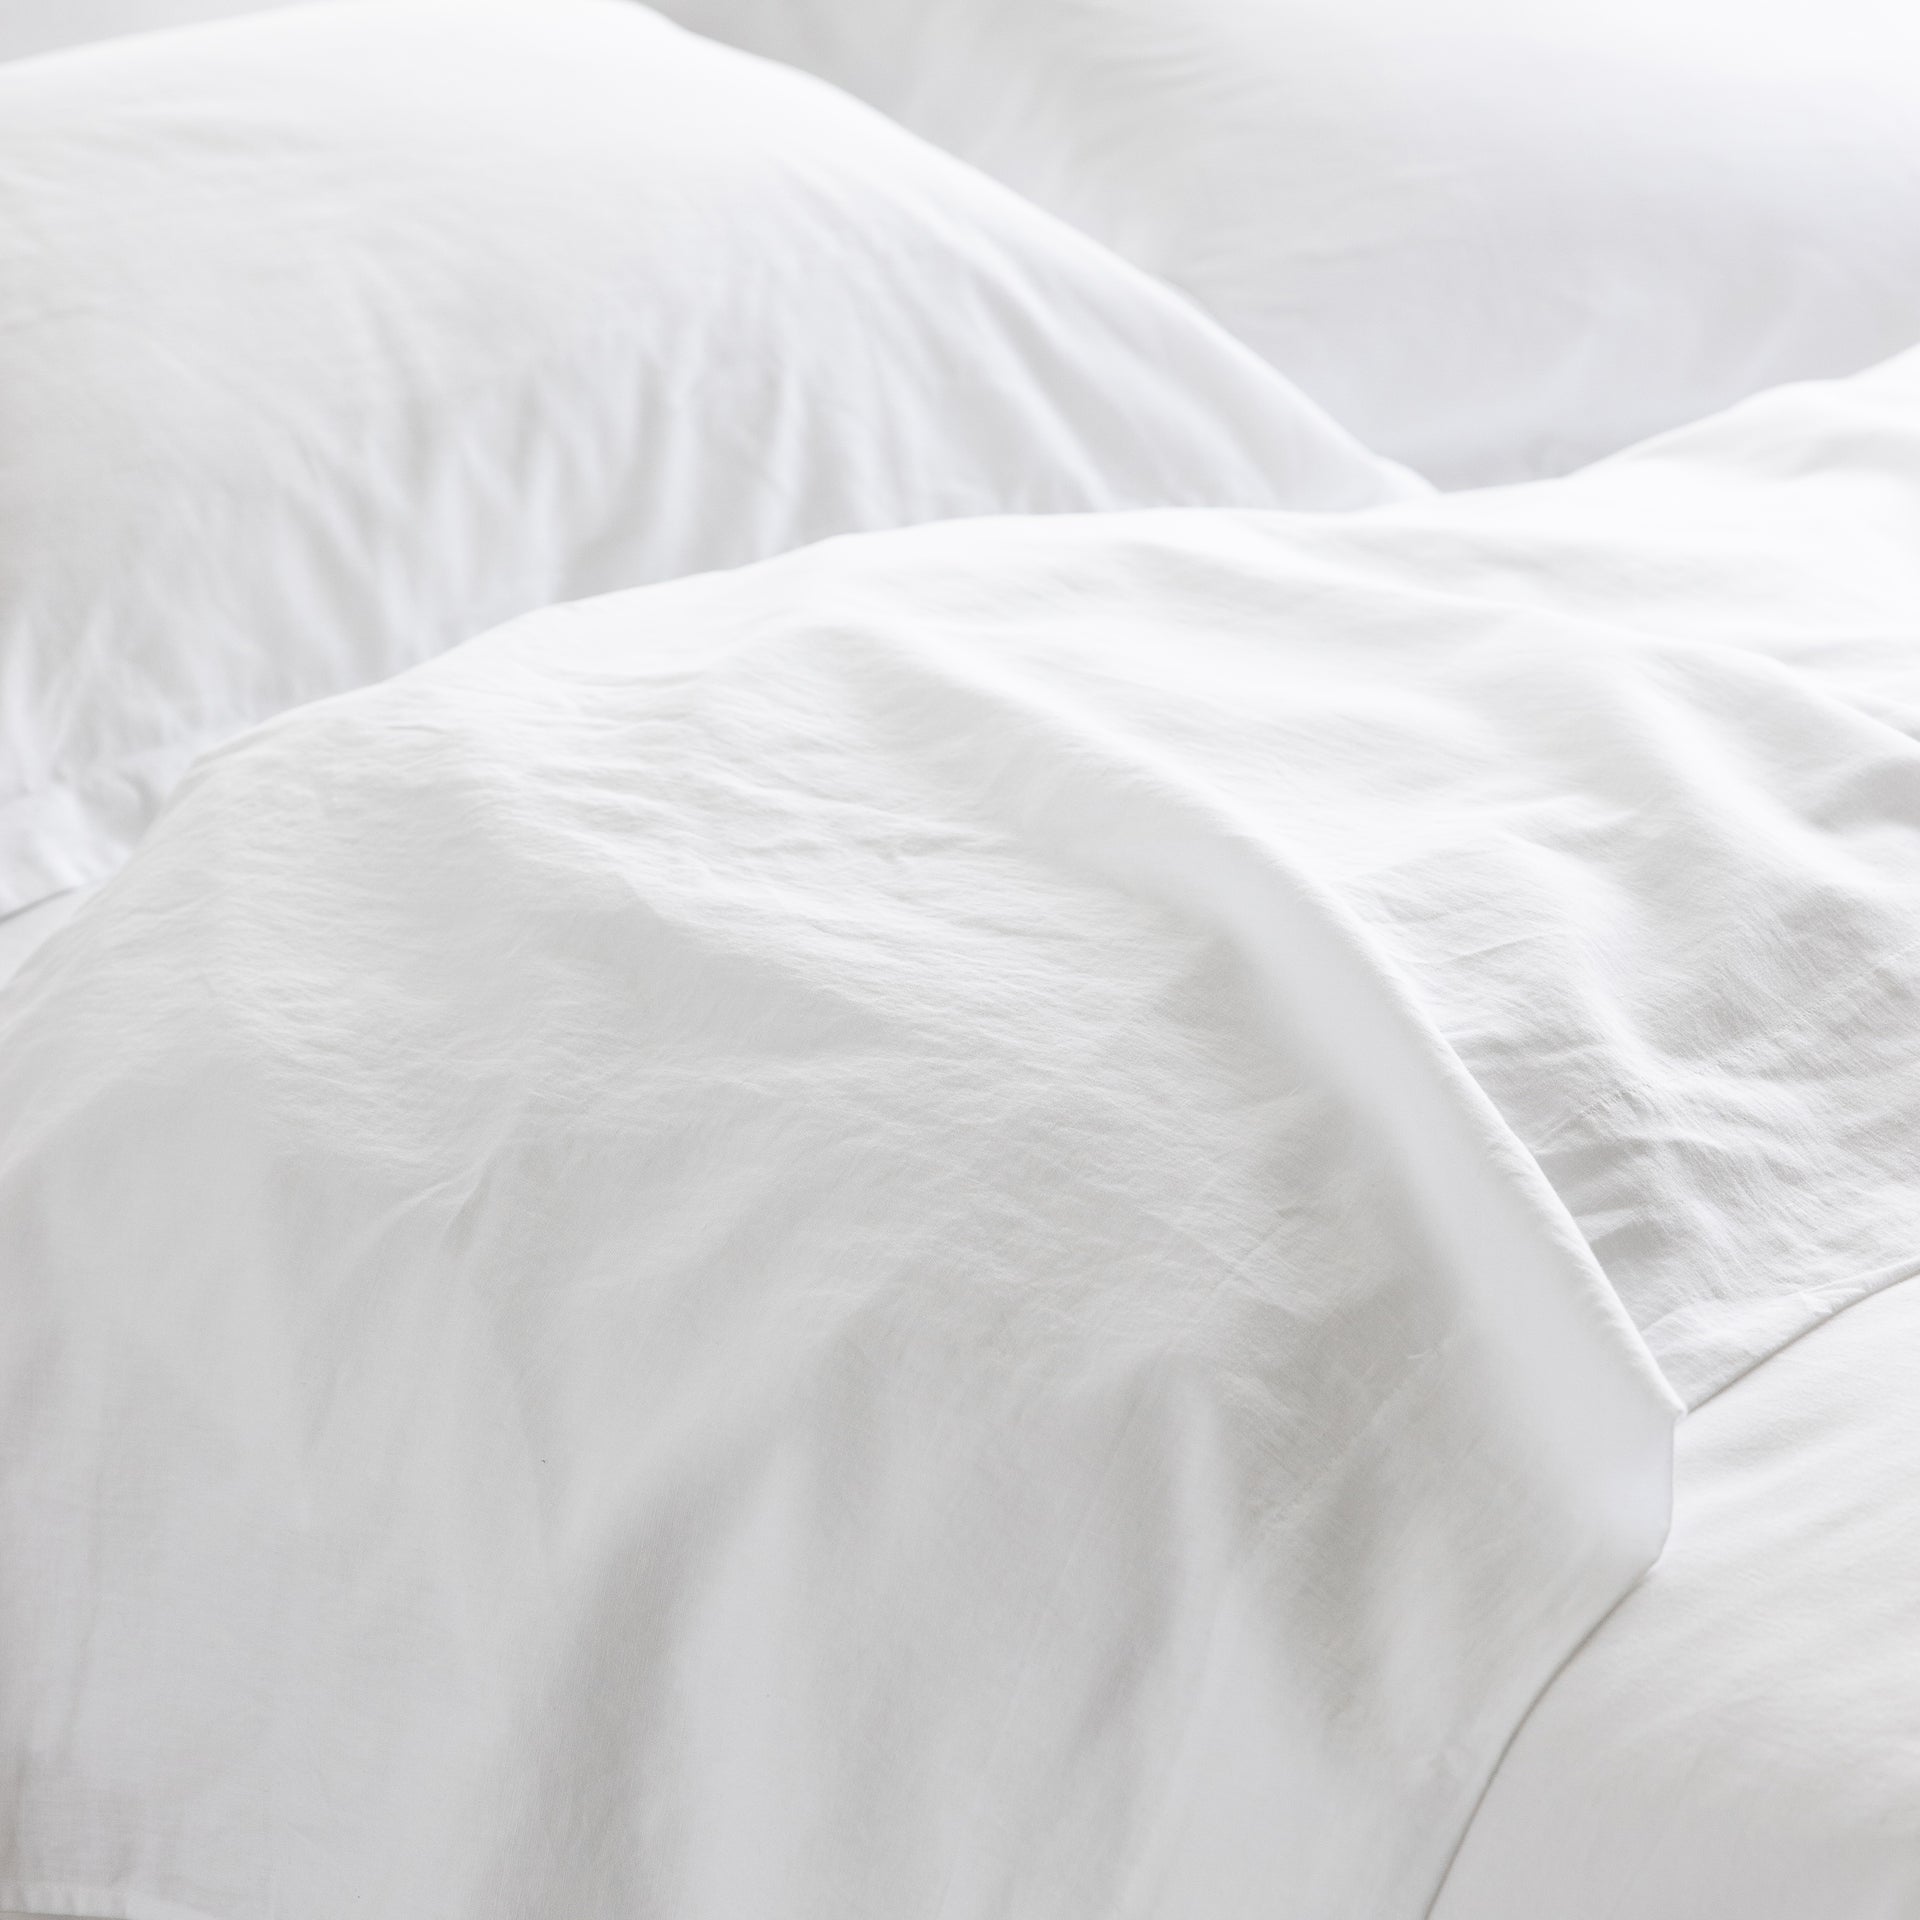 The Truth About Wrinkly Sheets